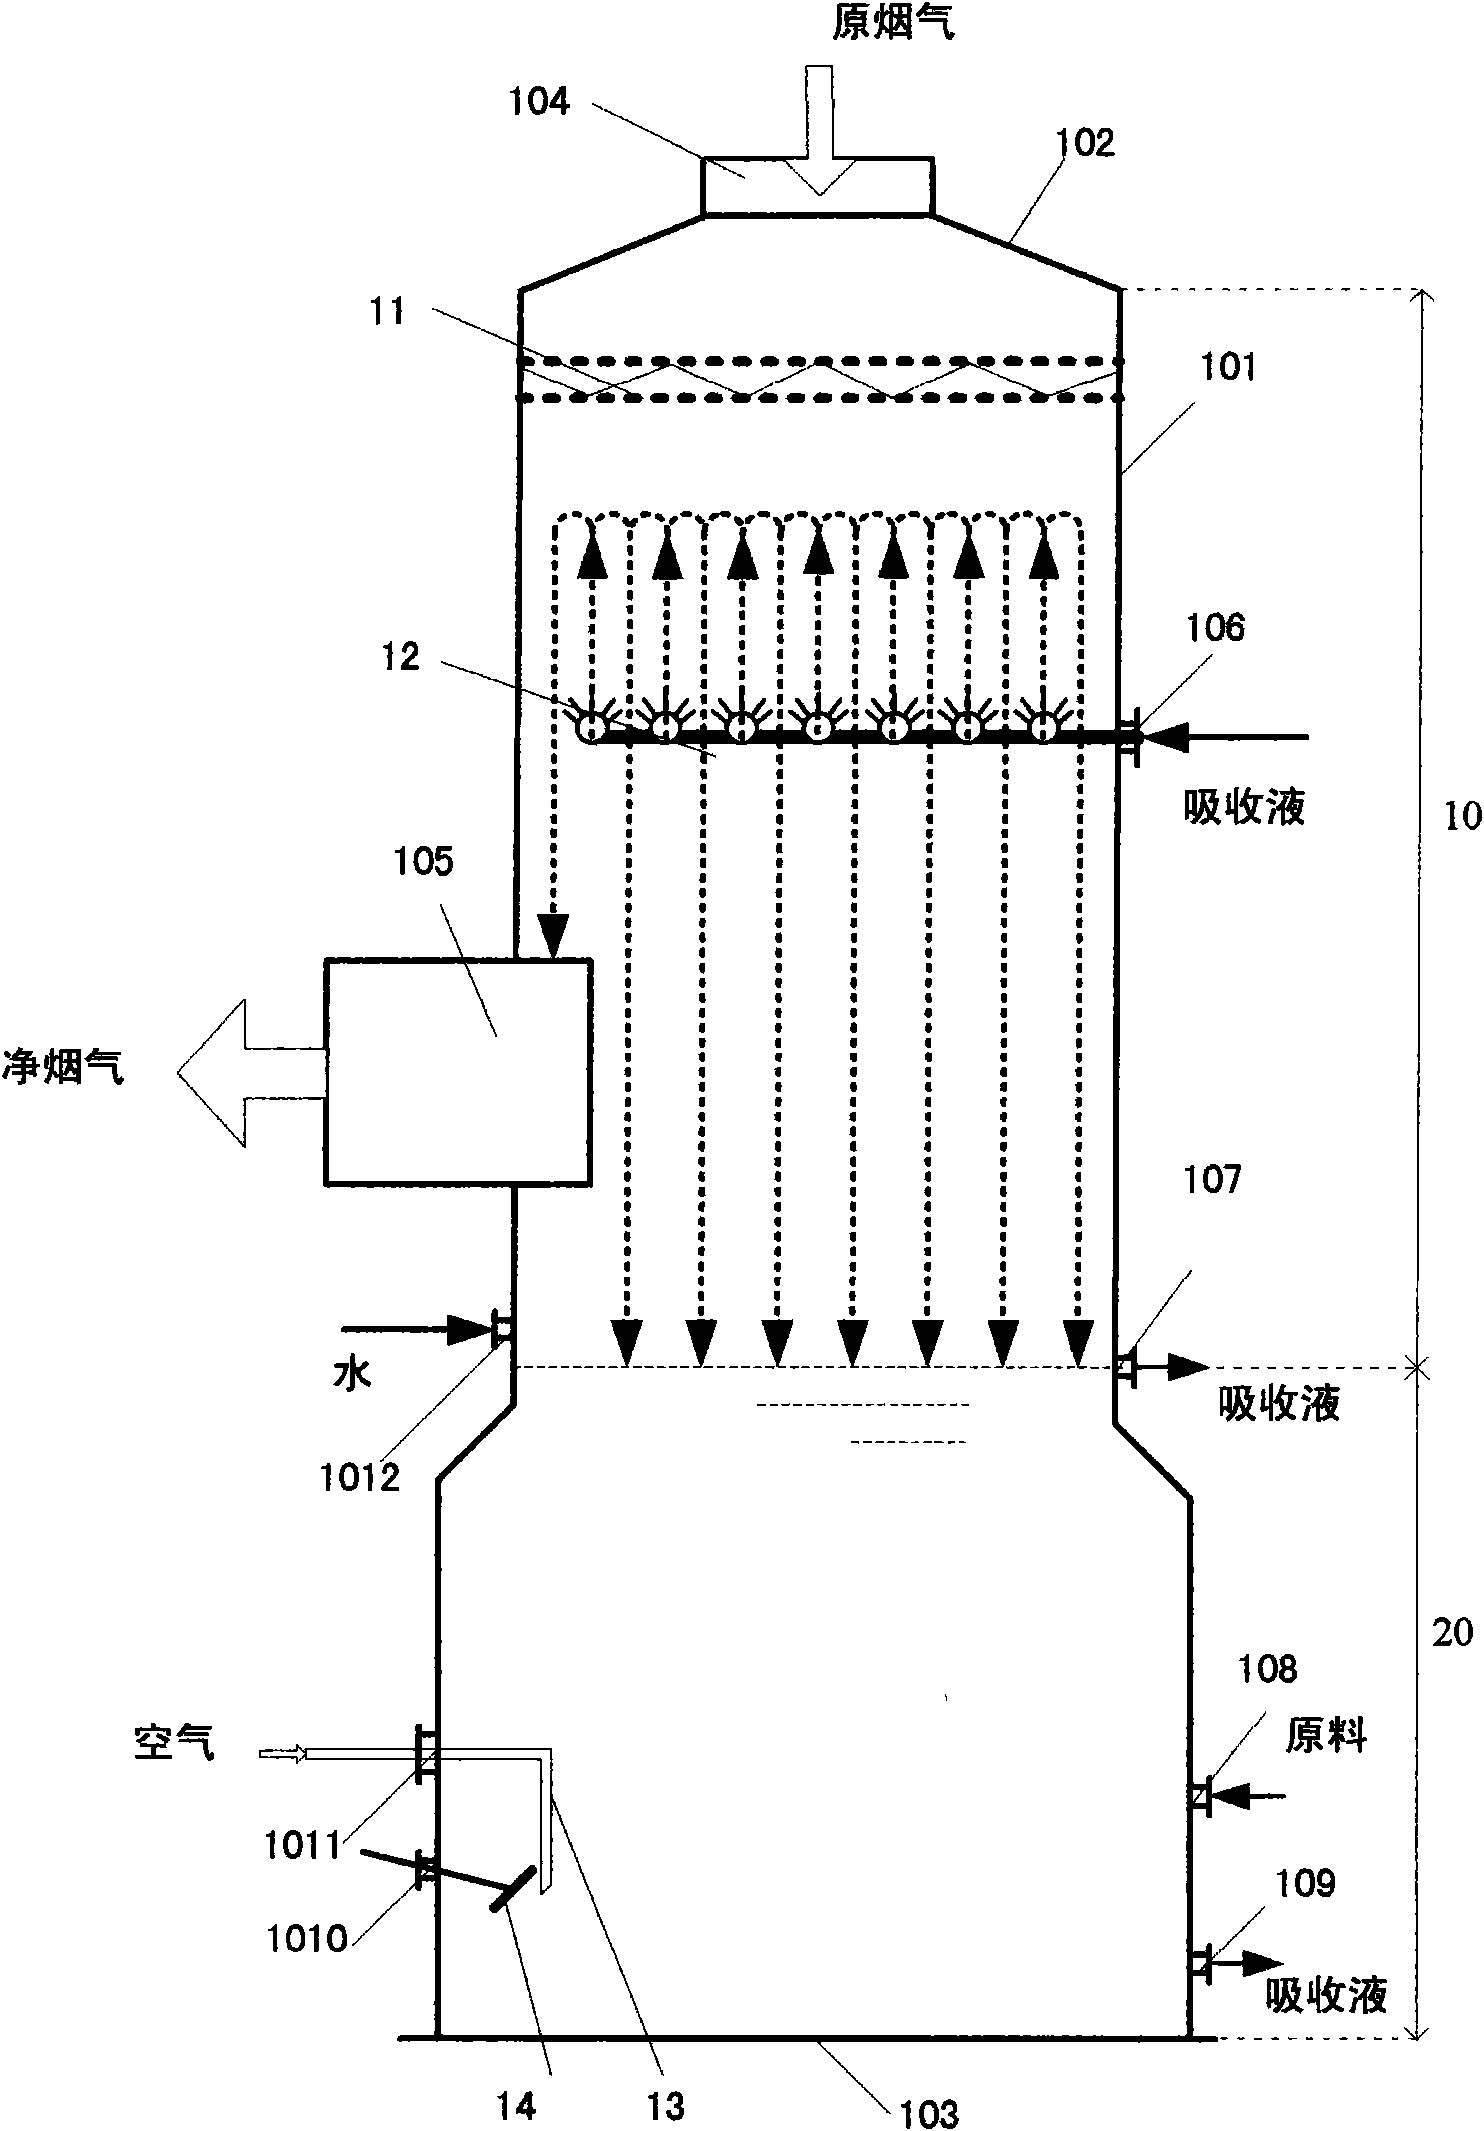 Jacking flue gas processing device and method